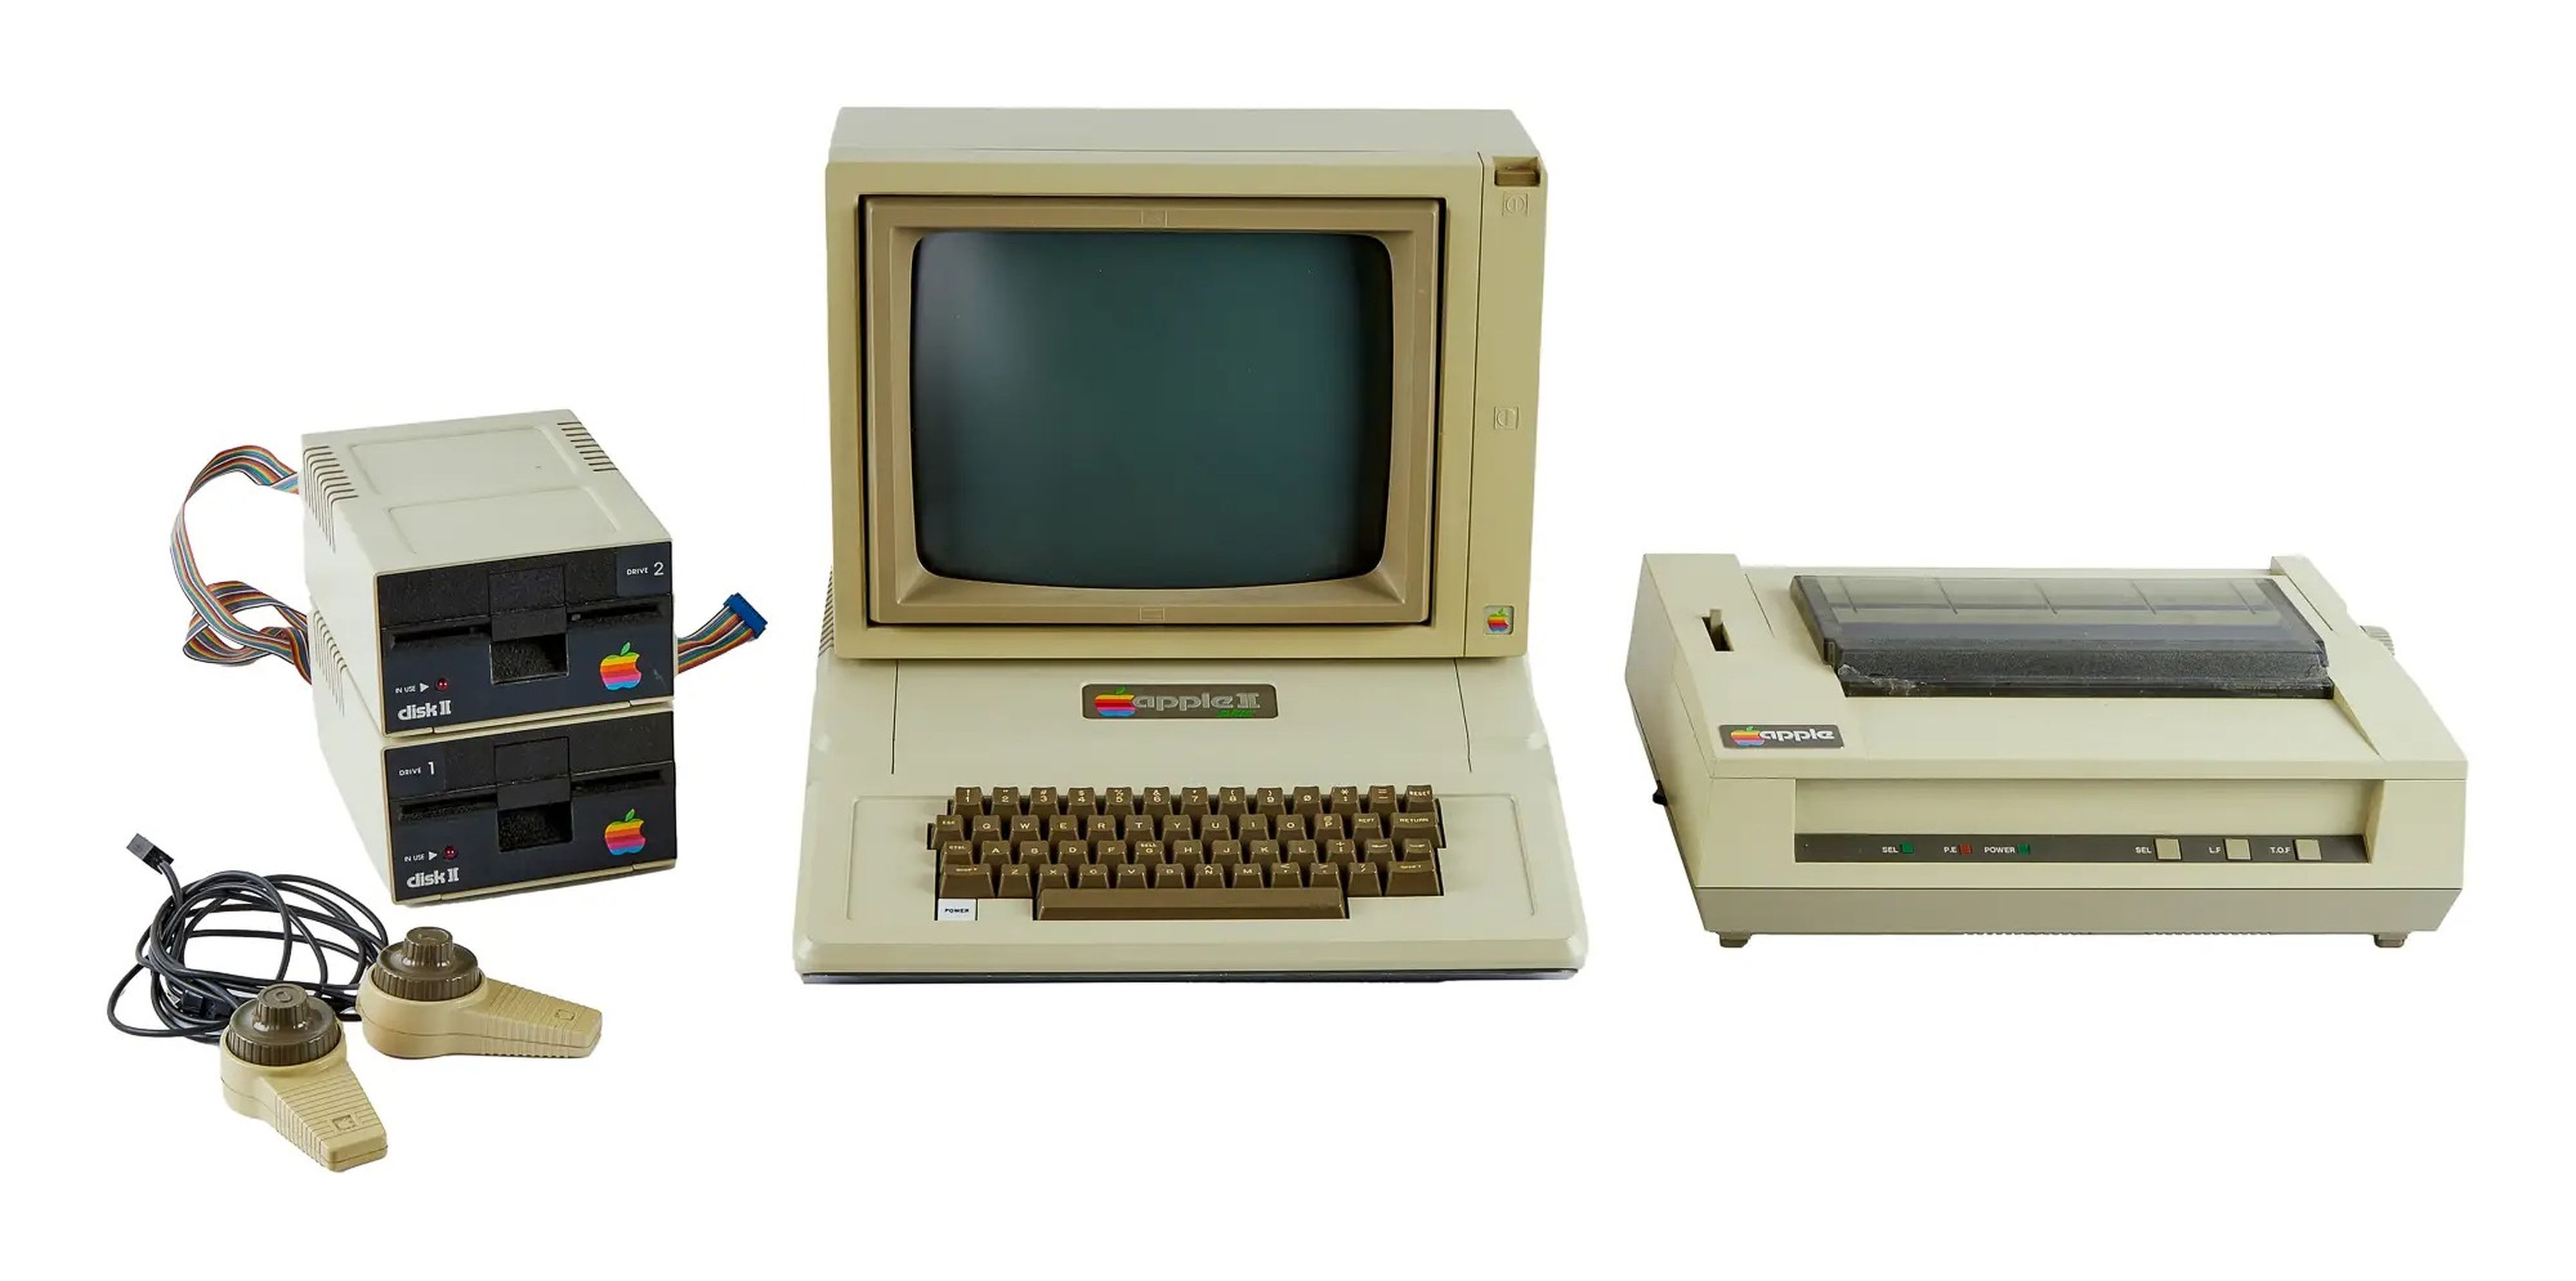 1979-1982 Apple II Plus Computer with a monitor, two disk drives on the left of the computer, two game paddles on the far left, and a printer on the right of the printer